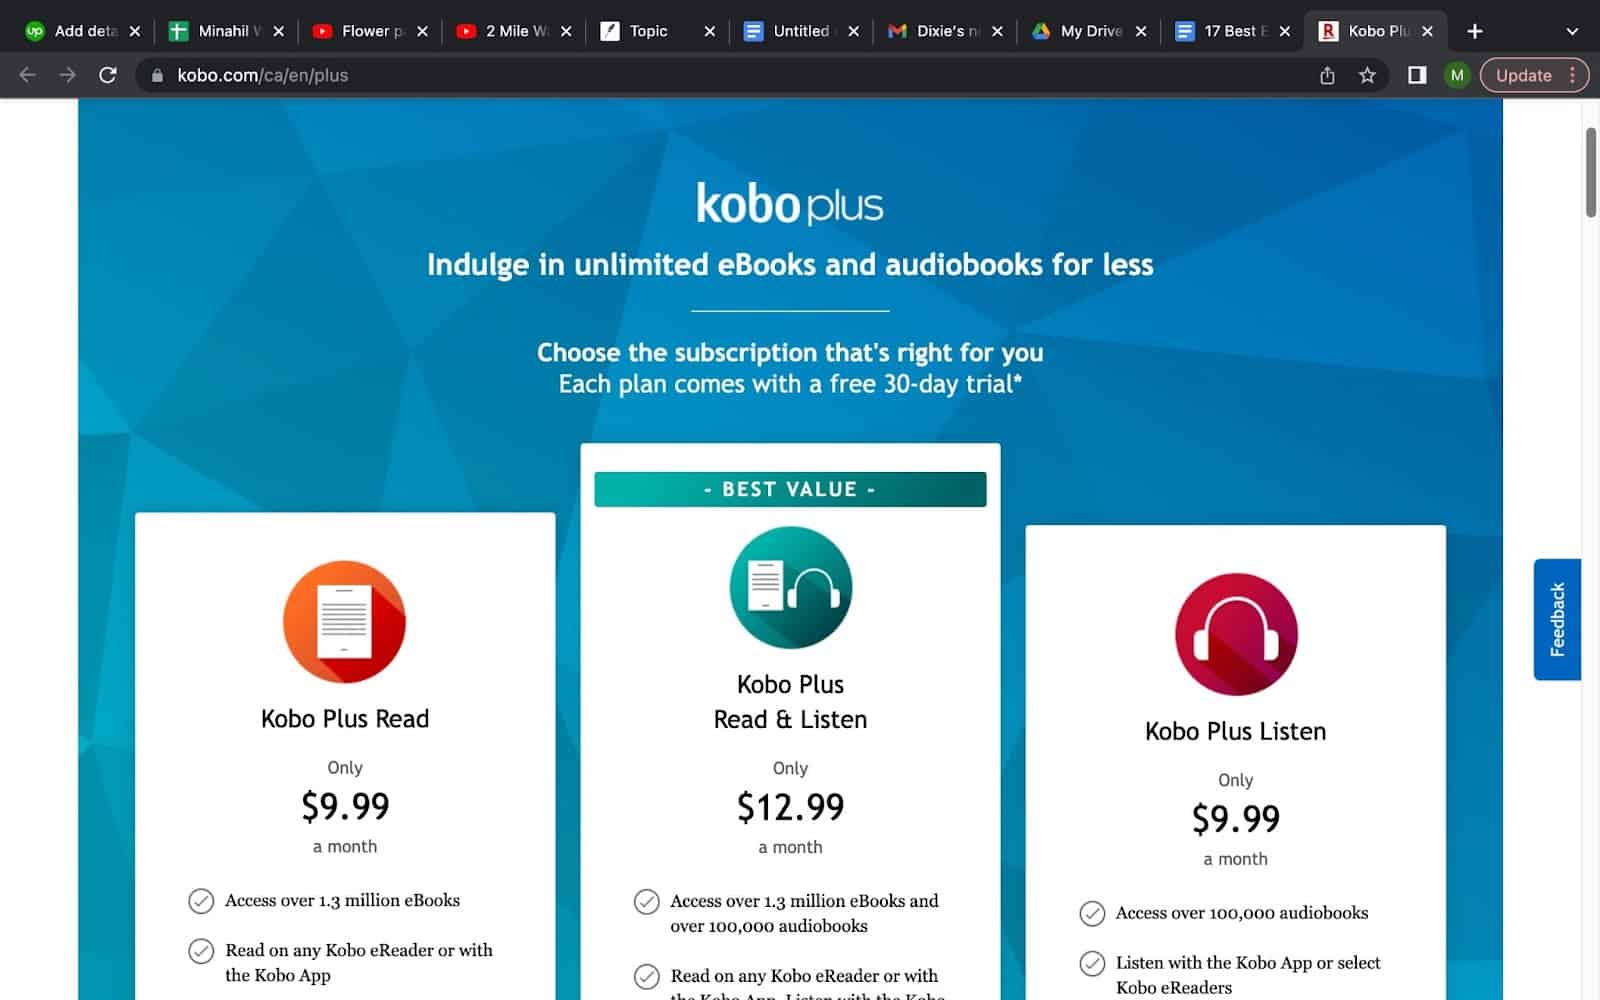 Kobo Plus pricing table showing "Read", "Read & Listen" and "Listen" plans